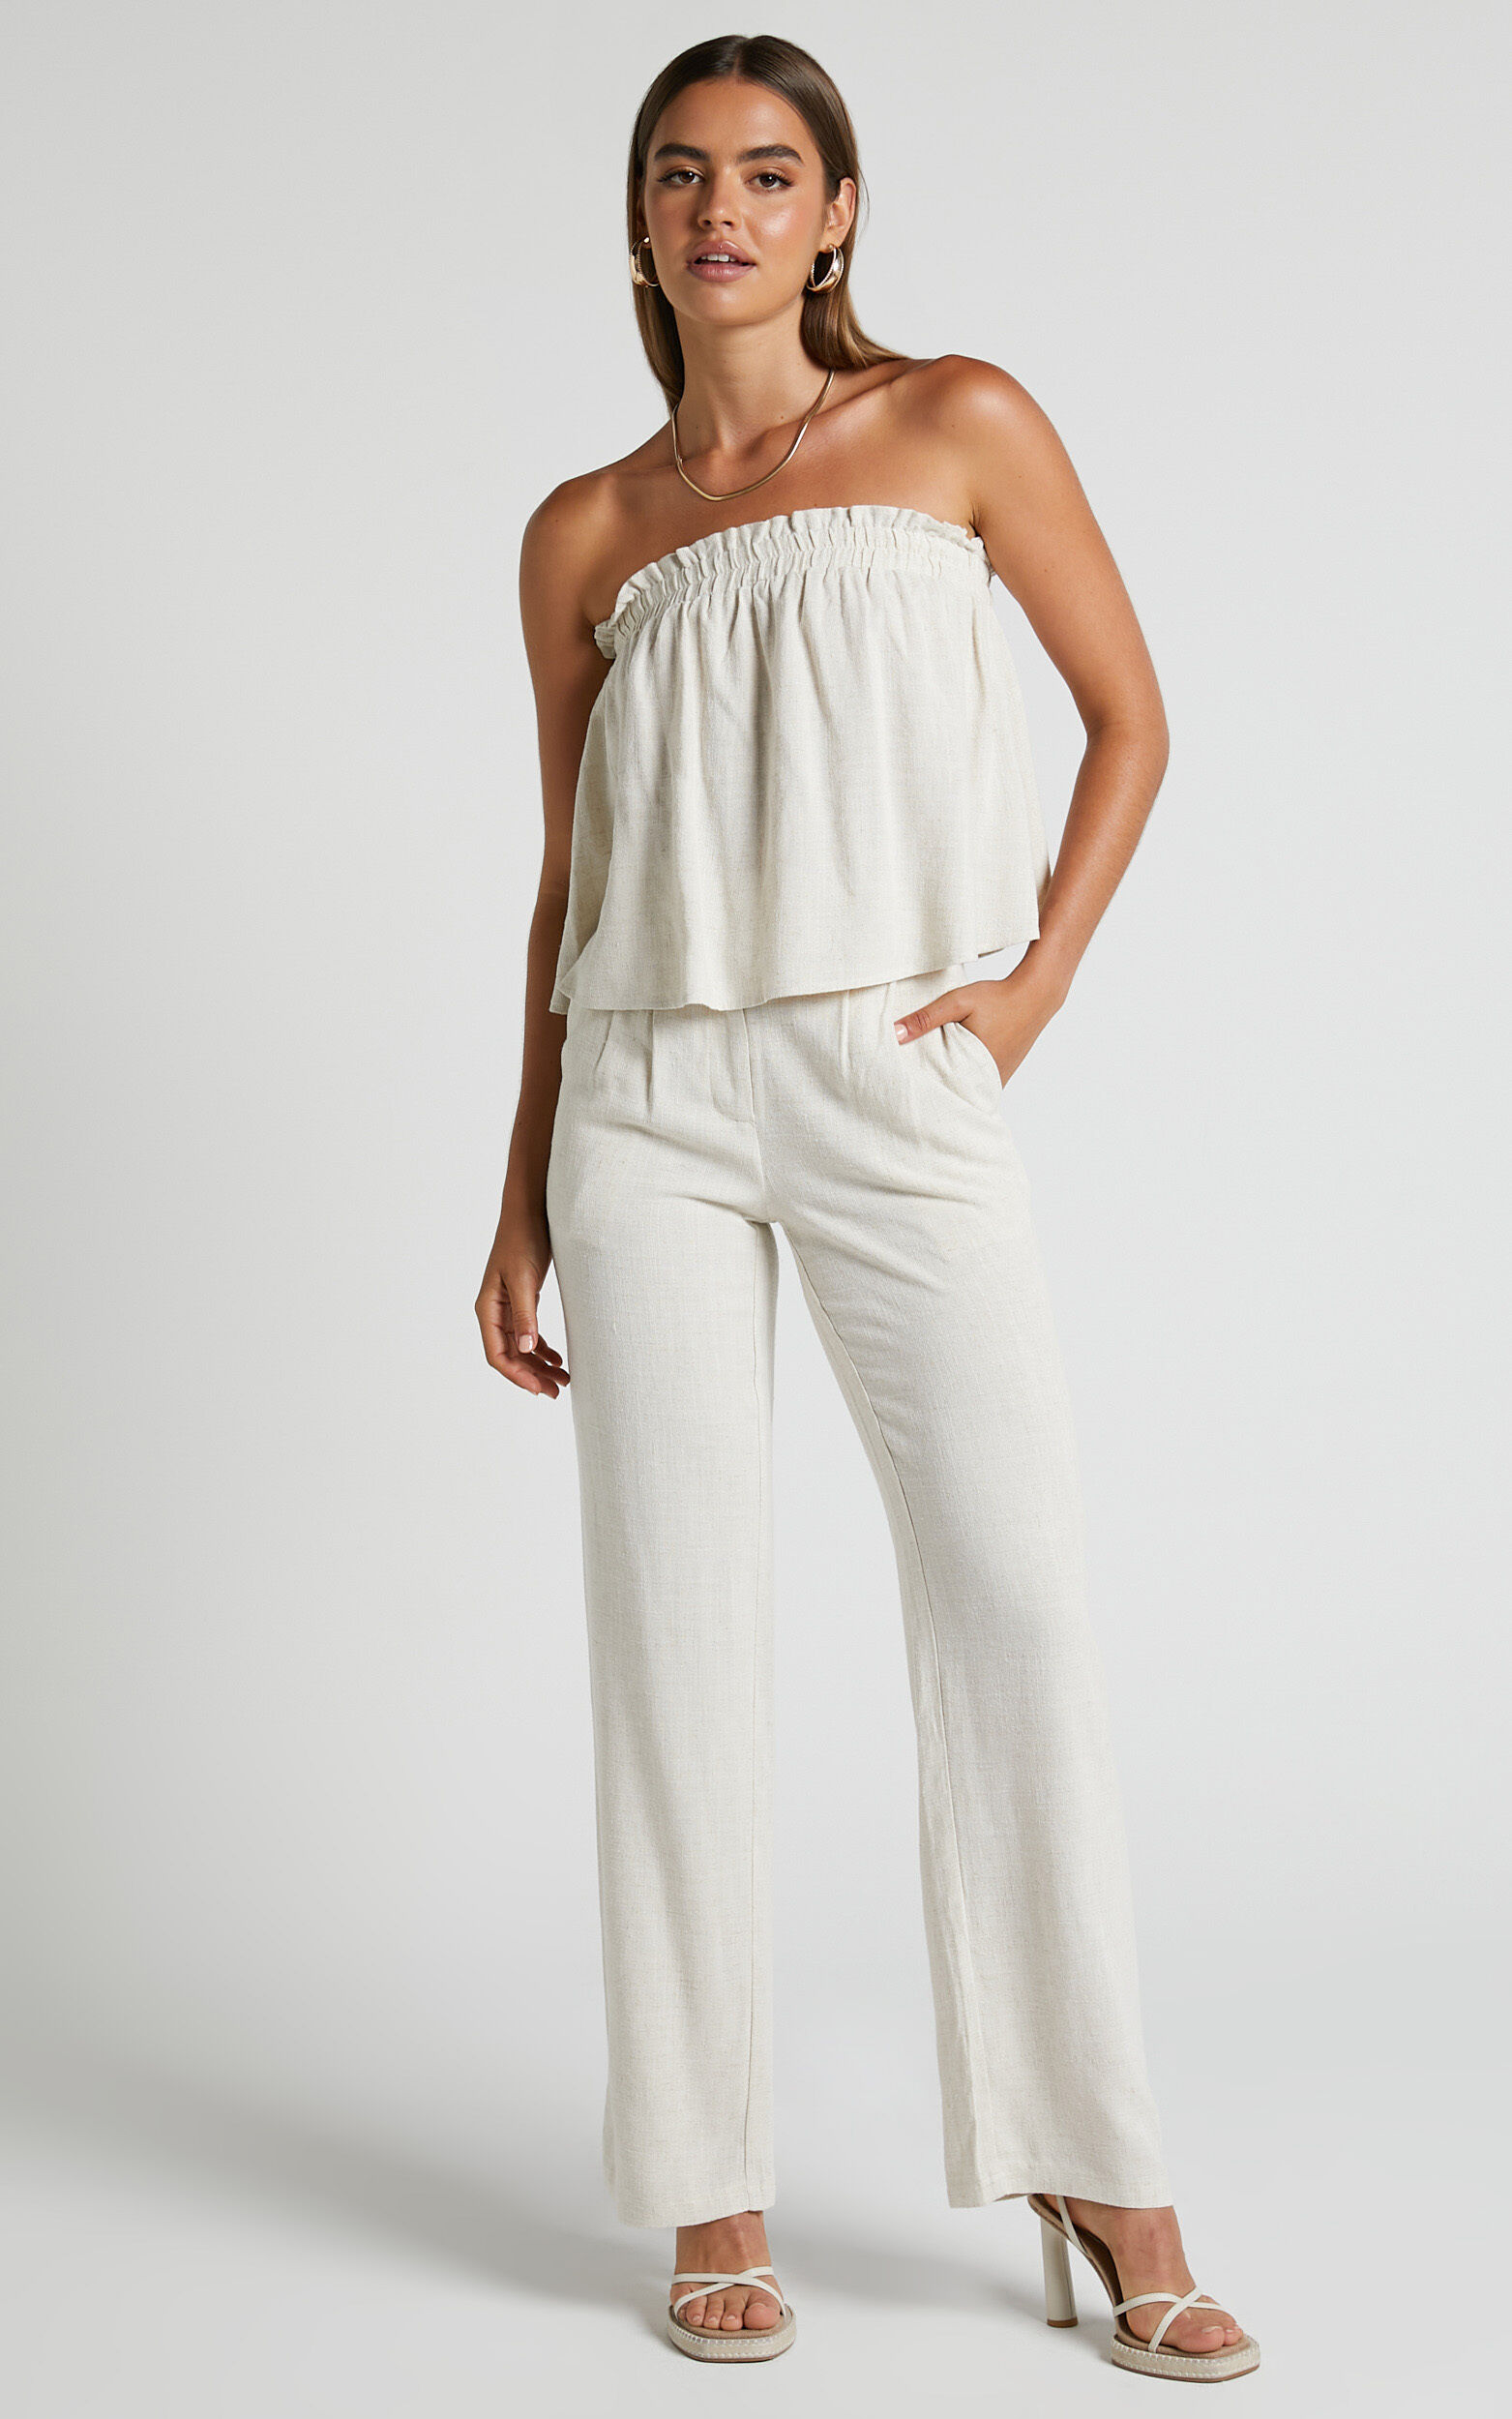 Emmy Two Piece Set - Strapless Top and Relaxed Pants in Oat - 04, NEU1